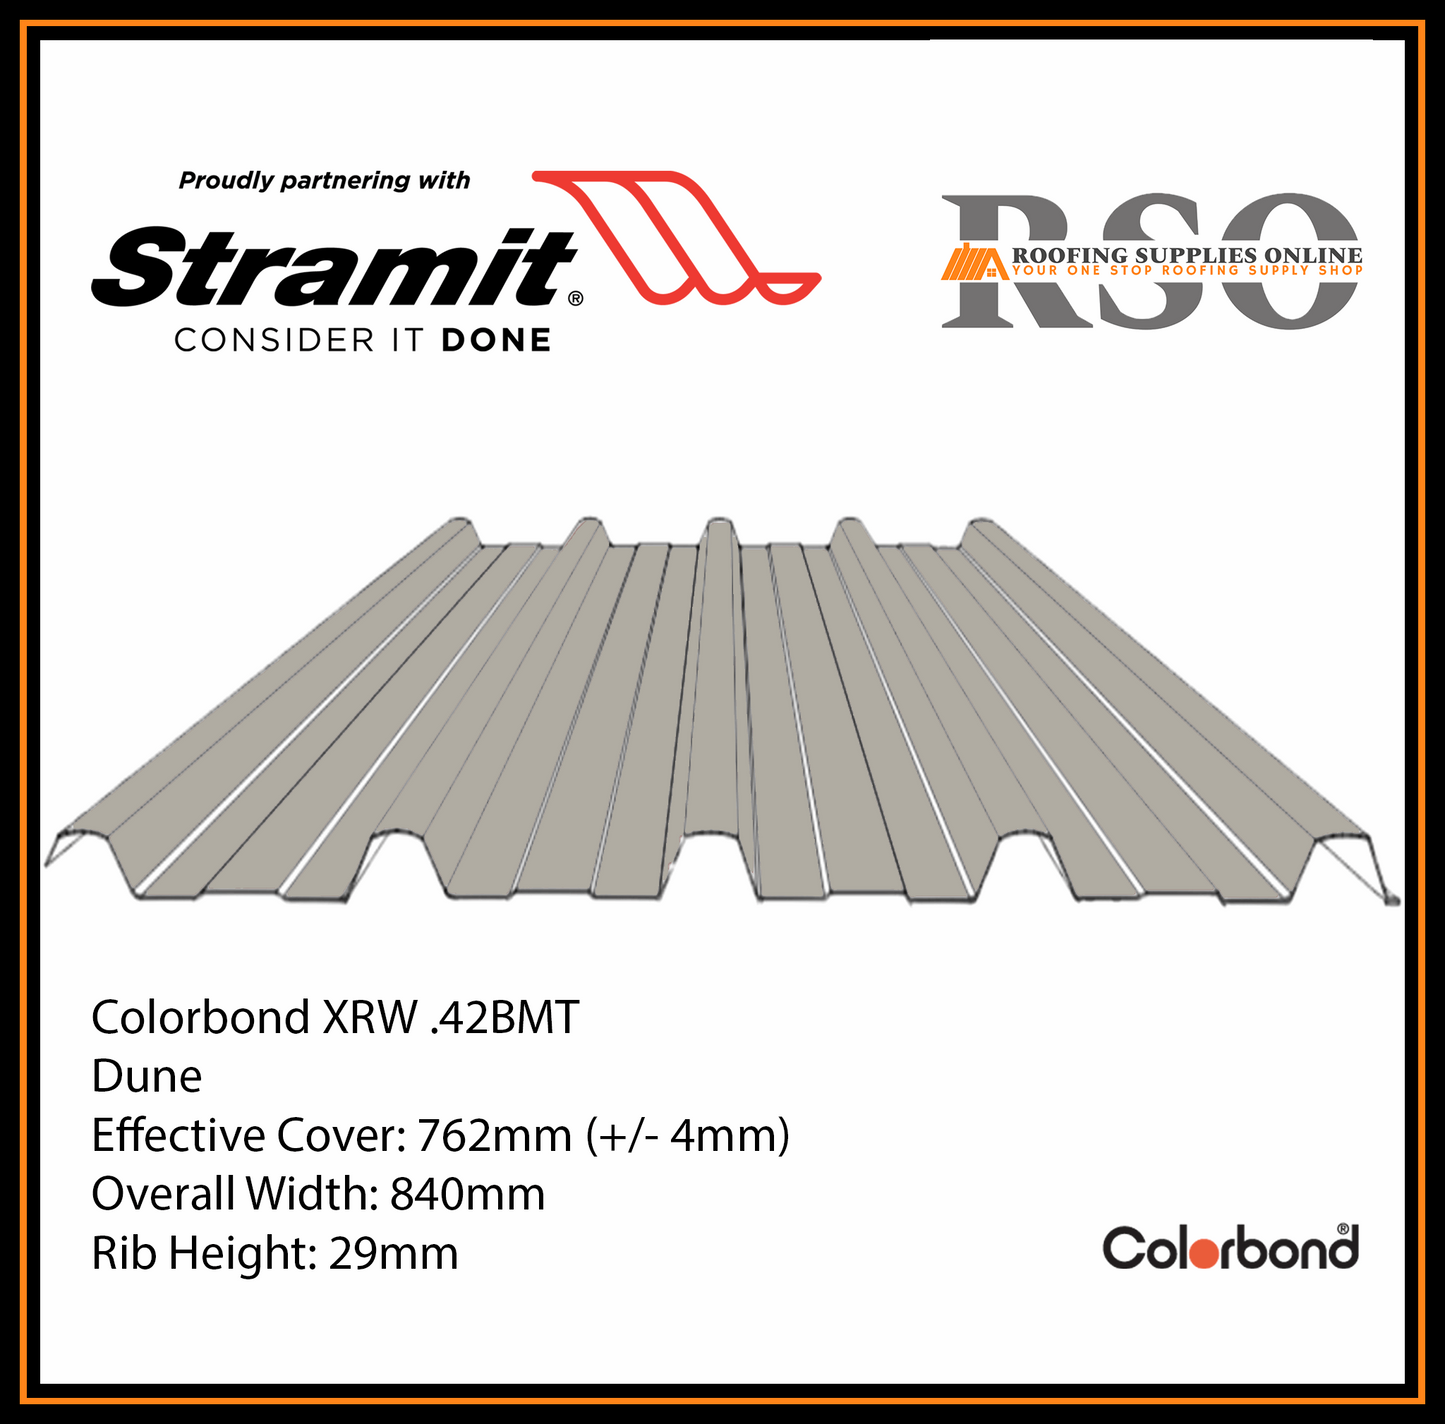 This is an illustration of a Monoclad profile roof sheet which is also known as 5 Rib or Trimdek profile. This Roof sheet's colour is called Dune.